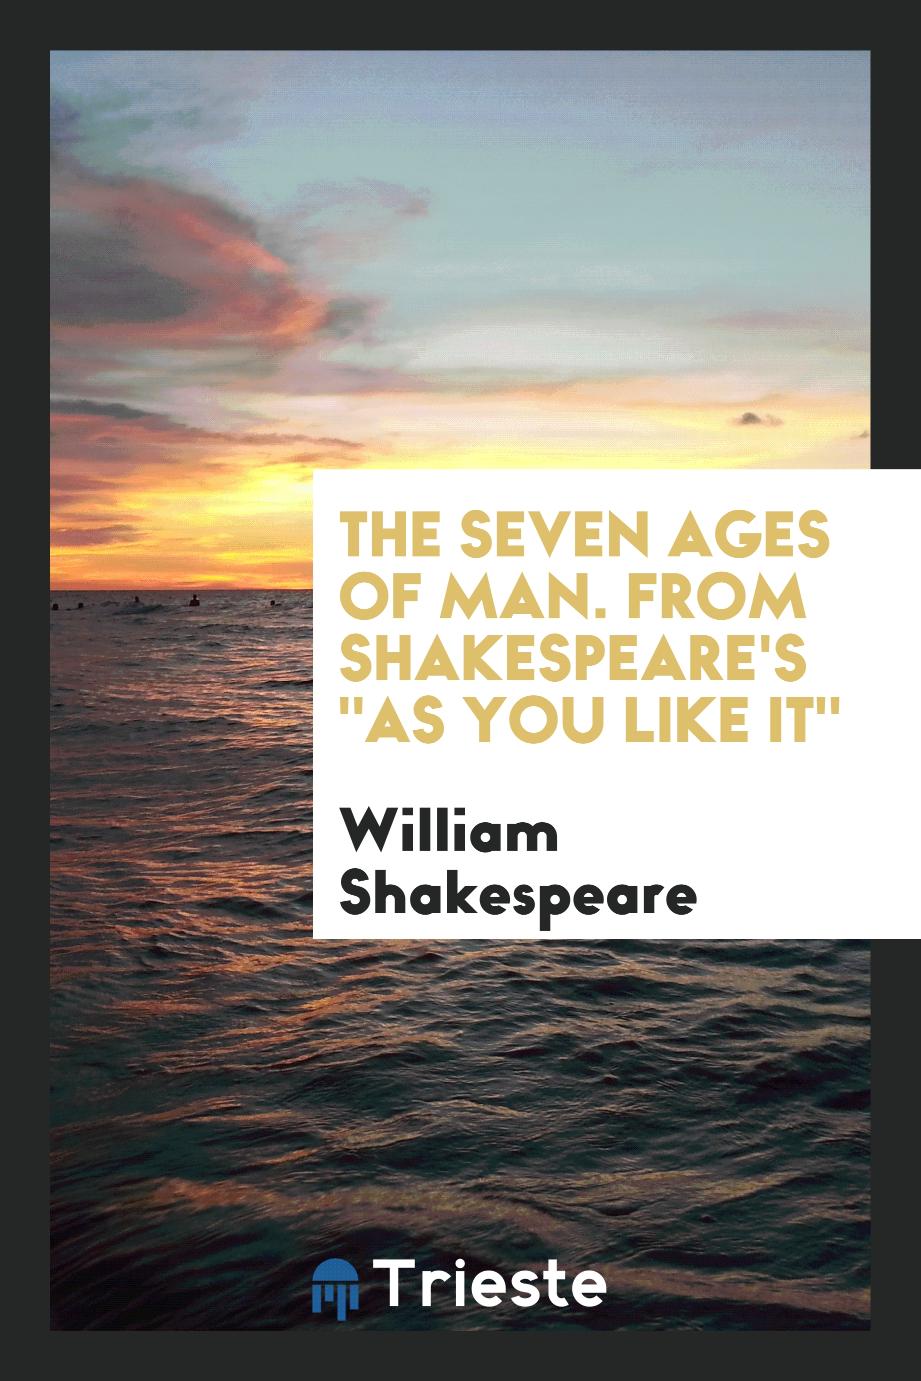 The seven ages of man. From Shakespeare's "As you like it"